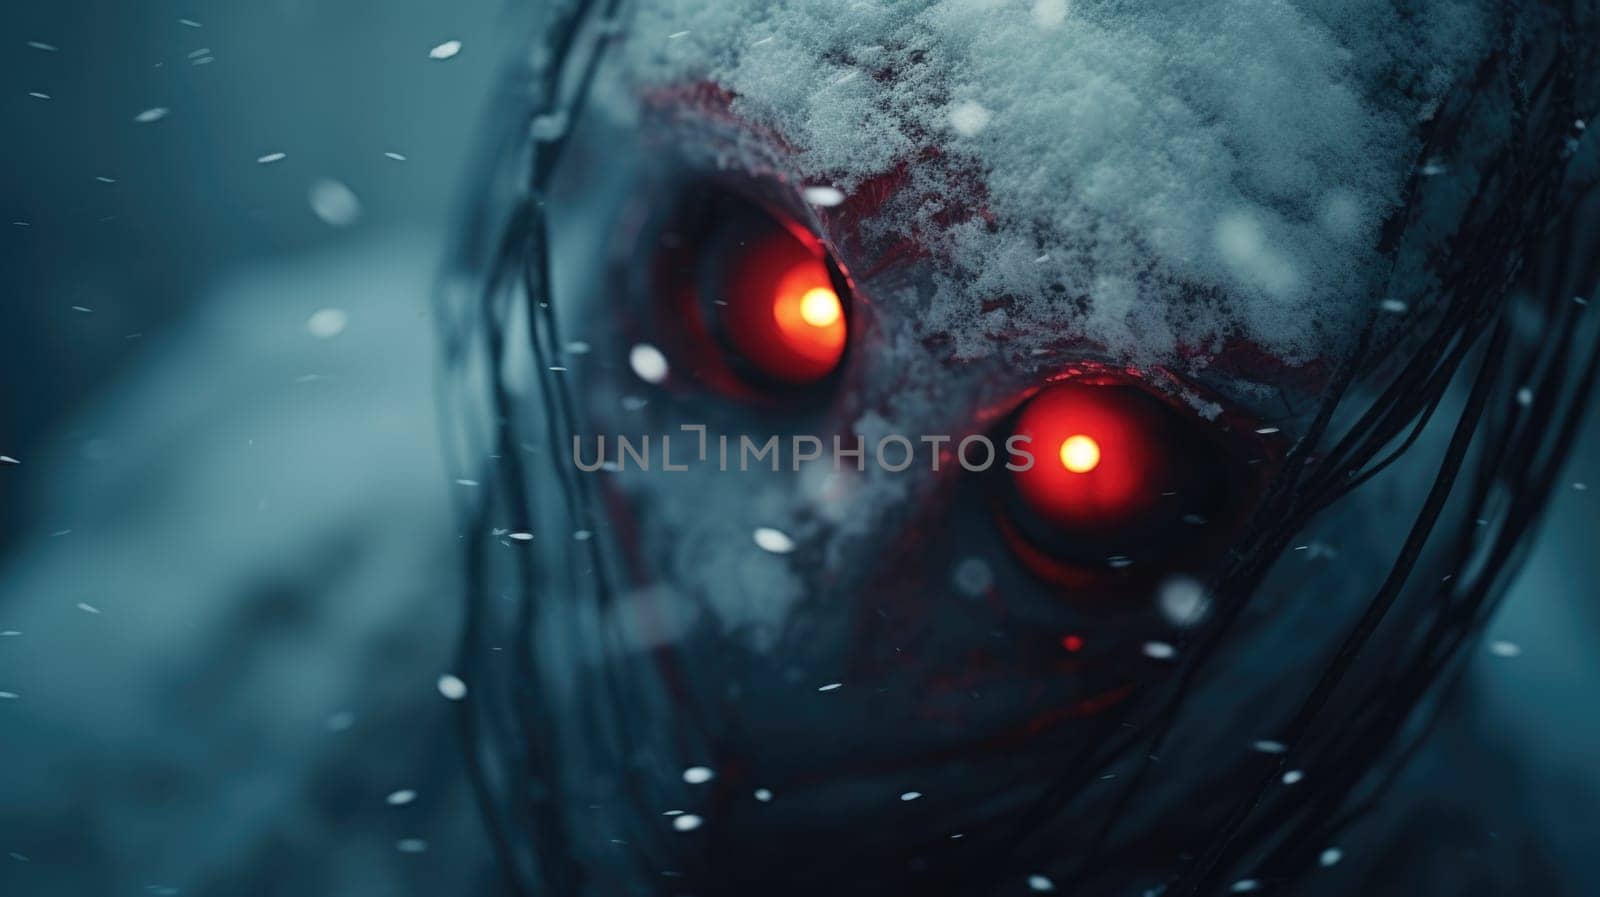 A creepy face with red eyes in the snow